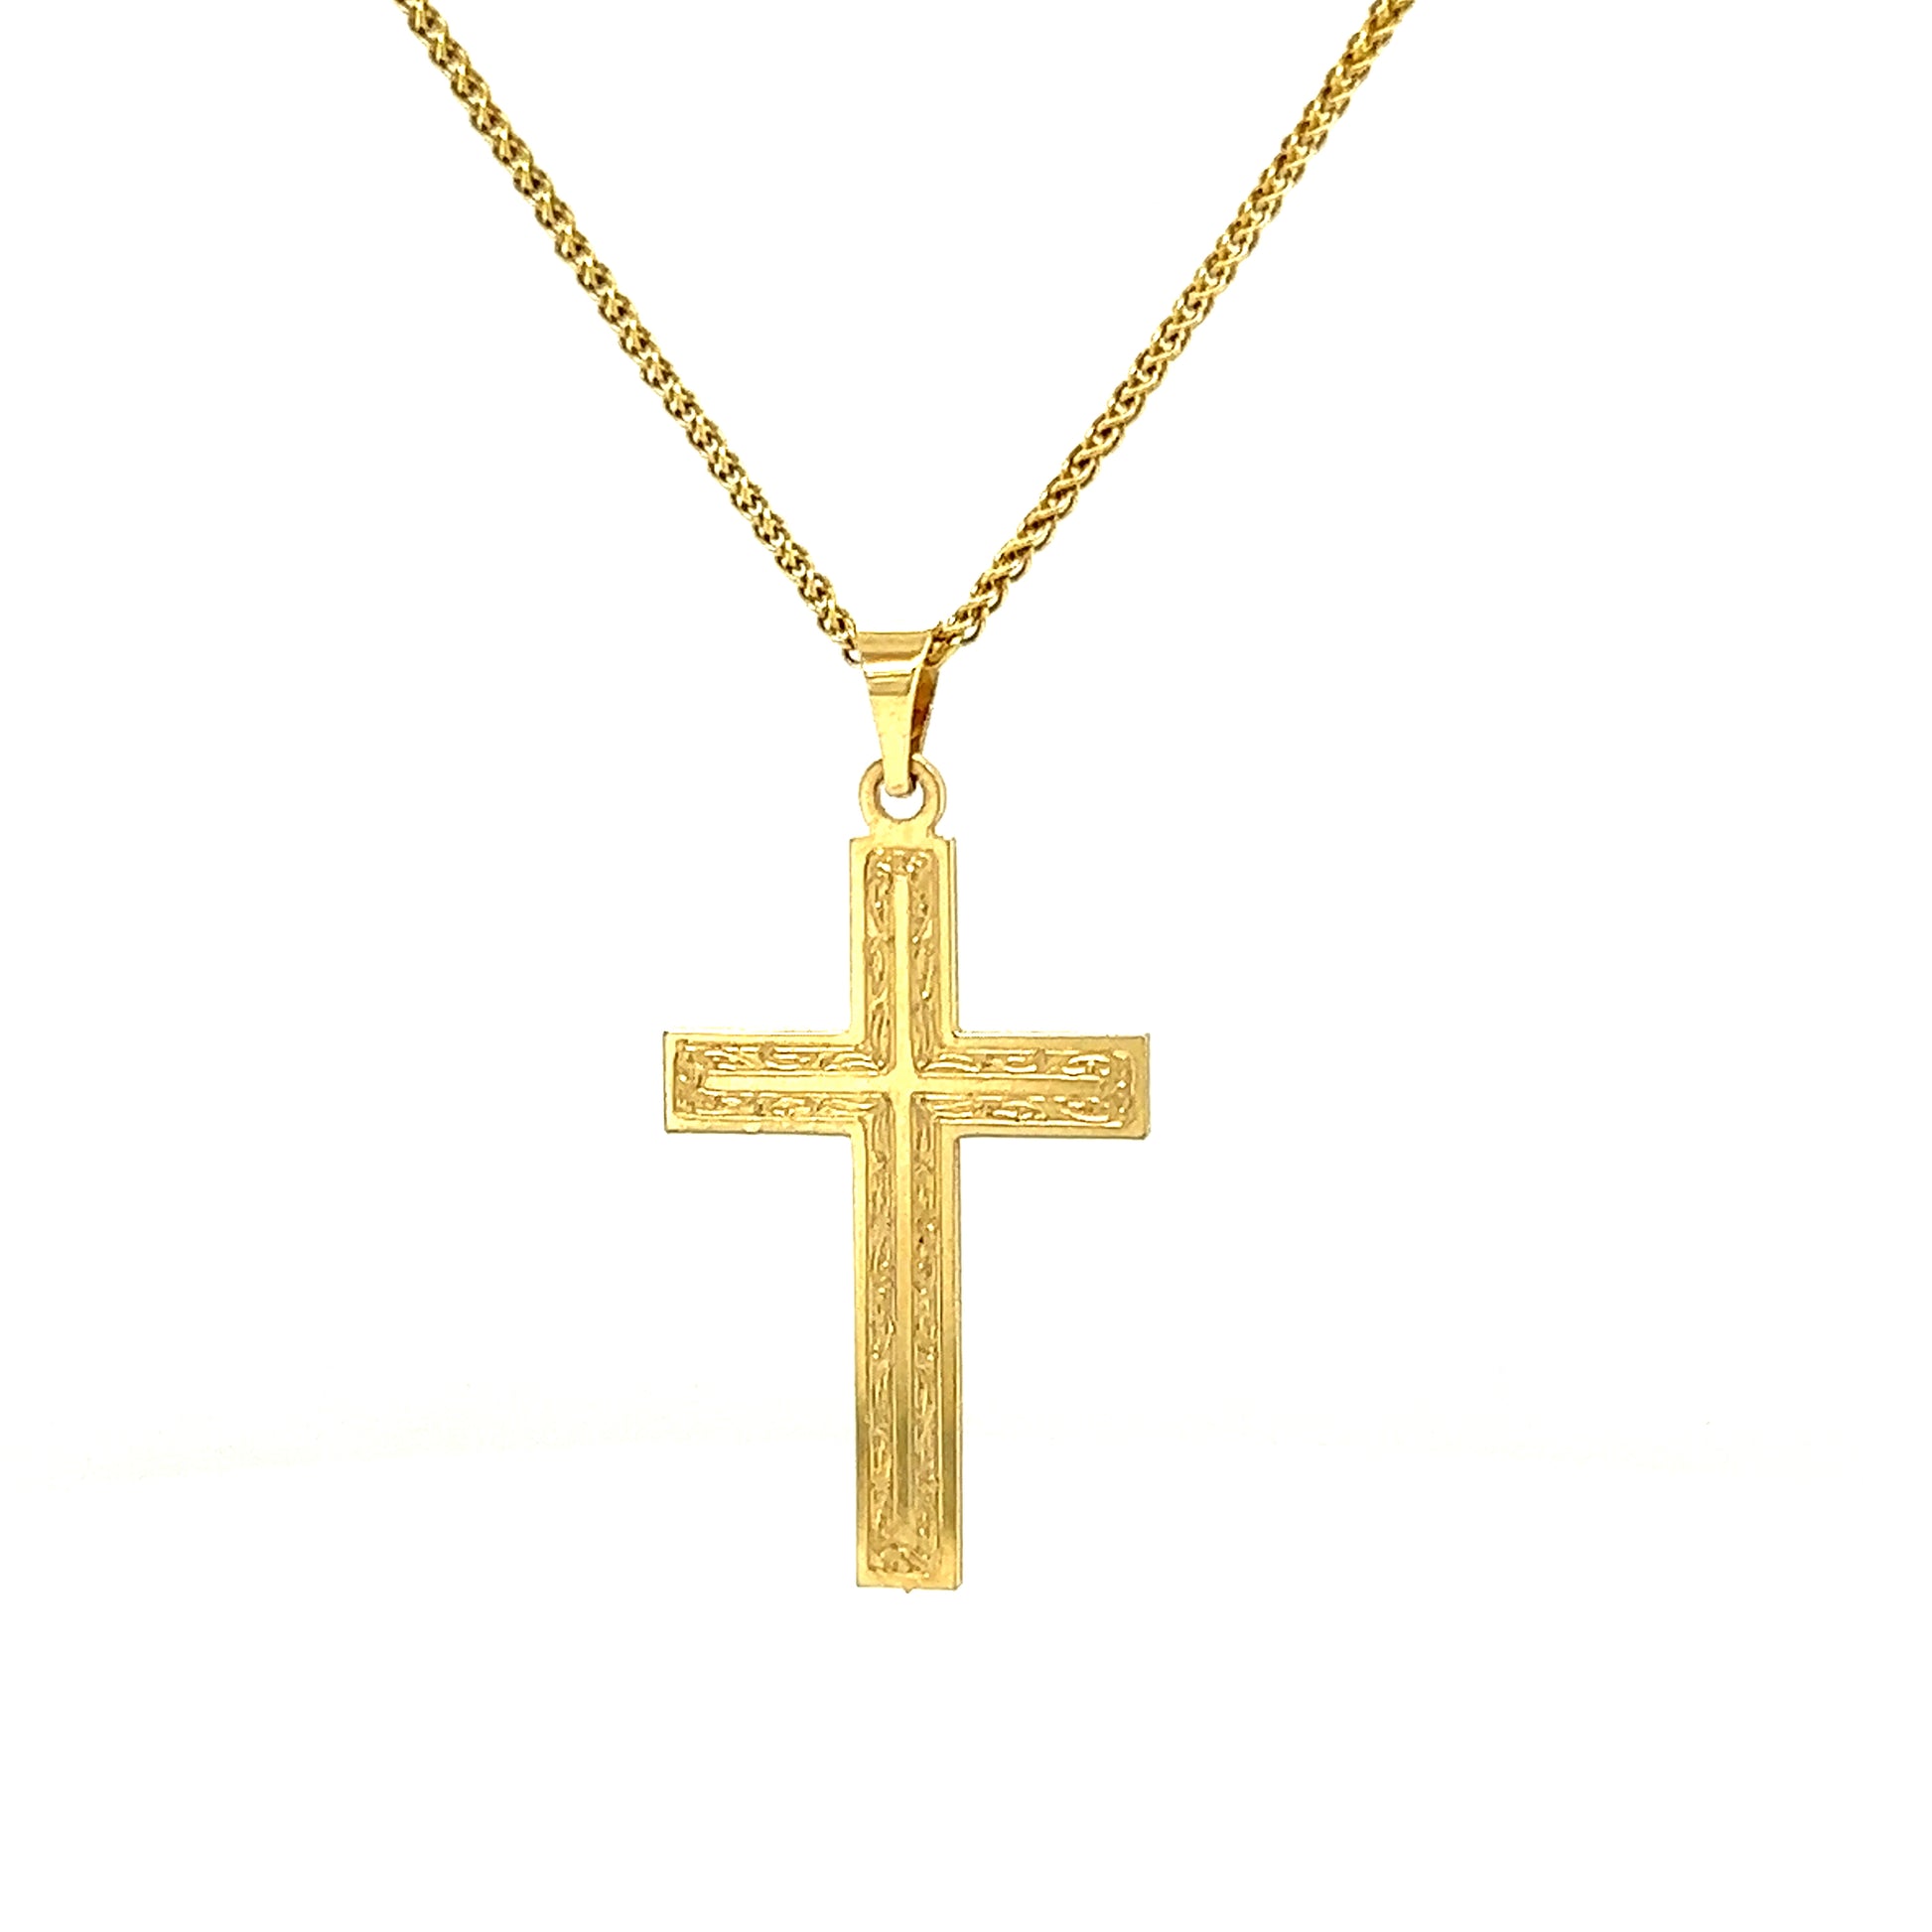 Small Etched Cross Pendant in 14K Yellow GoldPendant and Chain Front View